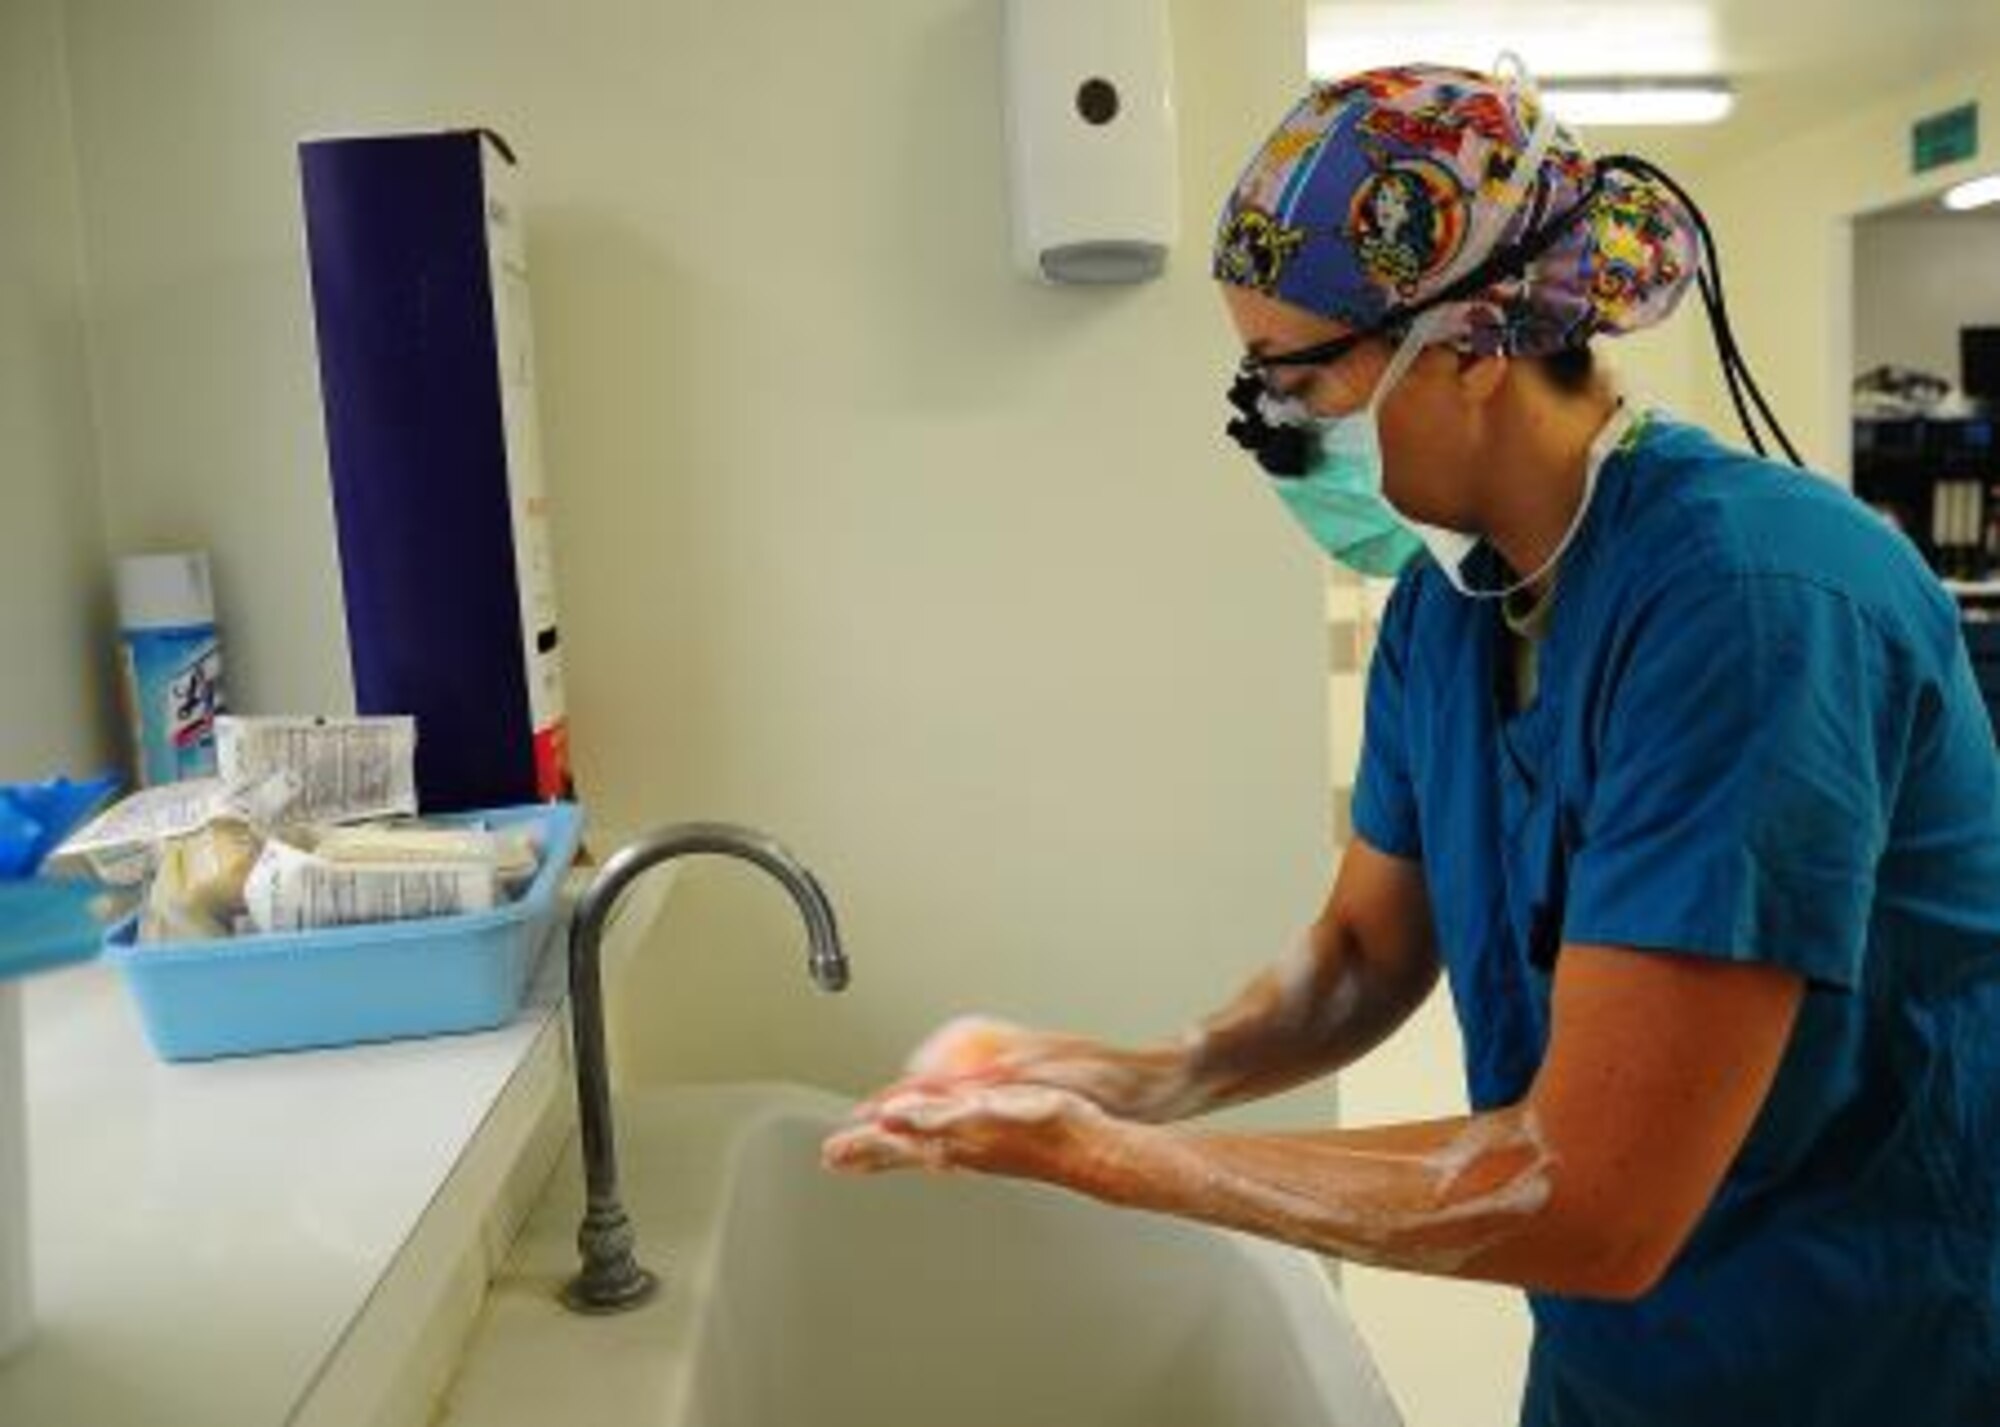 U.S. Air Force Lt. Col. Kerry Latham, plastic surgeon from Walter Reed Army Medical Center, Washington D.C., washes her hands prior to performing a syndactyly surgery during a surgery medical readiness training exercise at Northern Regional Hospital in Orange Walk, Belize, May 2, 2013. Syndactyly is a condition where the digits of the hand or foot are fused or webbed together. Military medical professionals from the U.S. are providing free medical treatment at multiple medical readiness training exercises throughout Belize as part of an exercise known as New Horizons. The MEDRETES are designed to provide humanitarian assistance and medical care to people in several communities, while helping improve the skills of U.S. military medical forces. (U.S. Air Force photo by Tech Sgt. Tony Tolley/Released)
